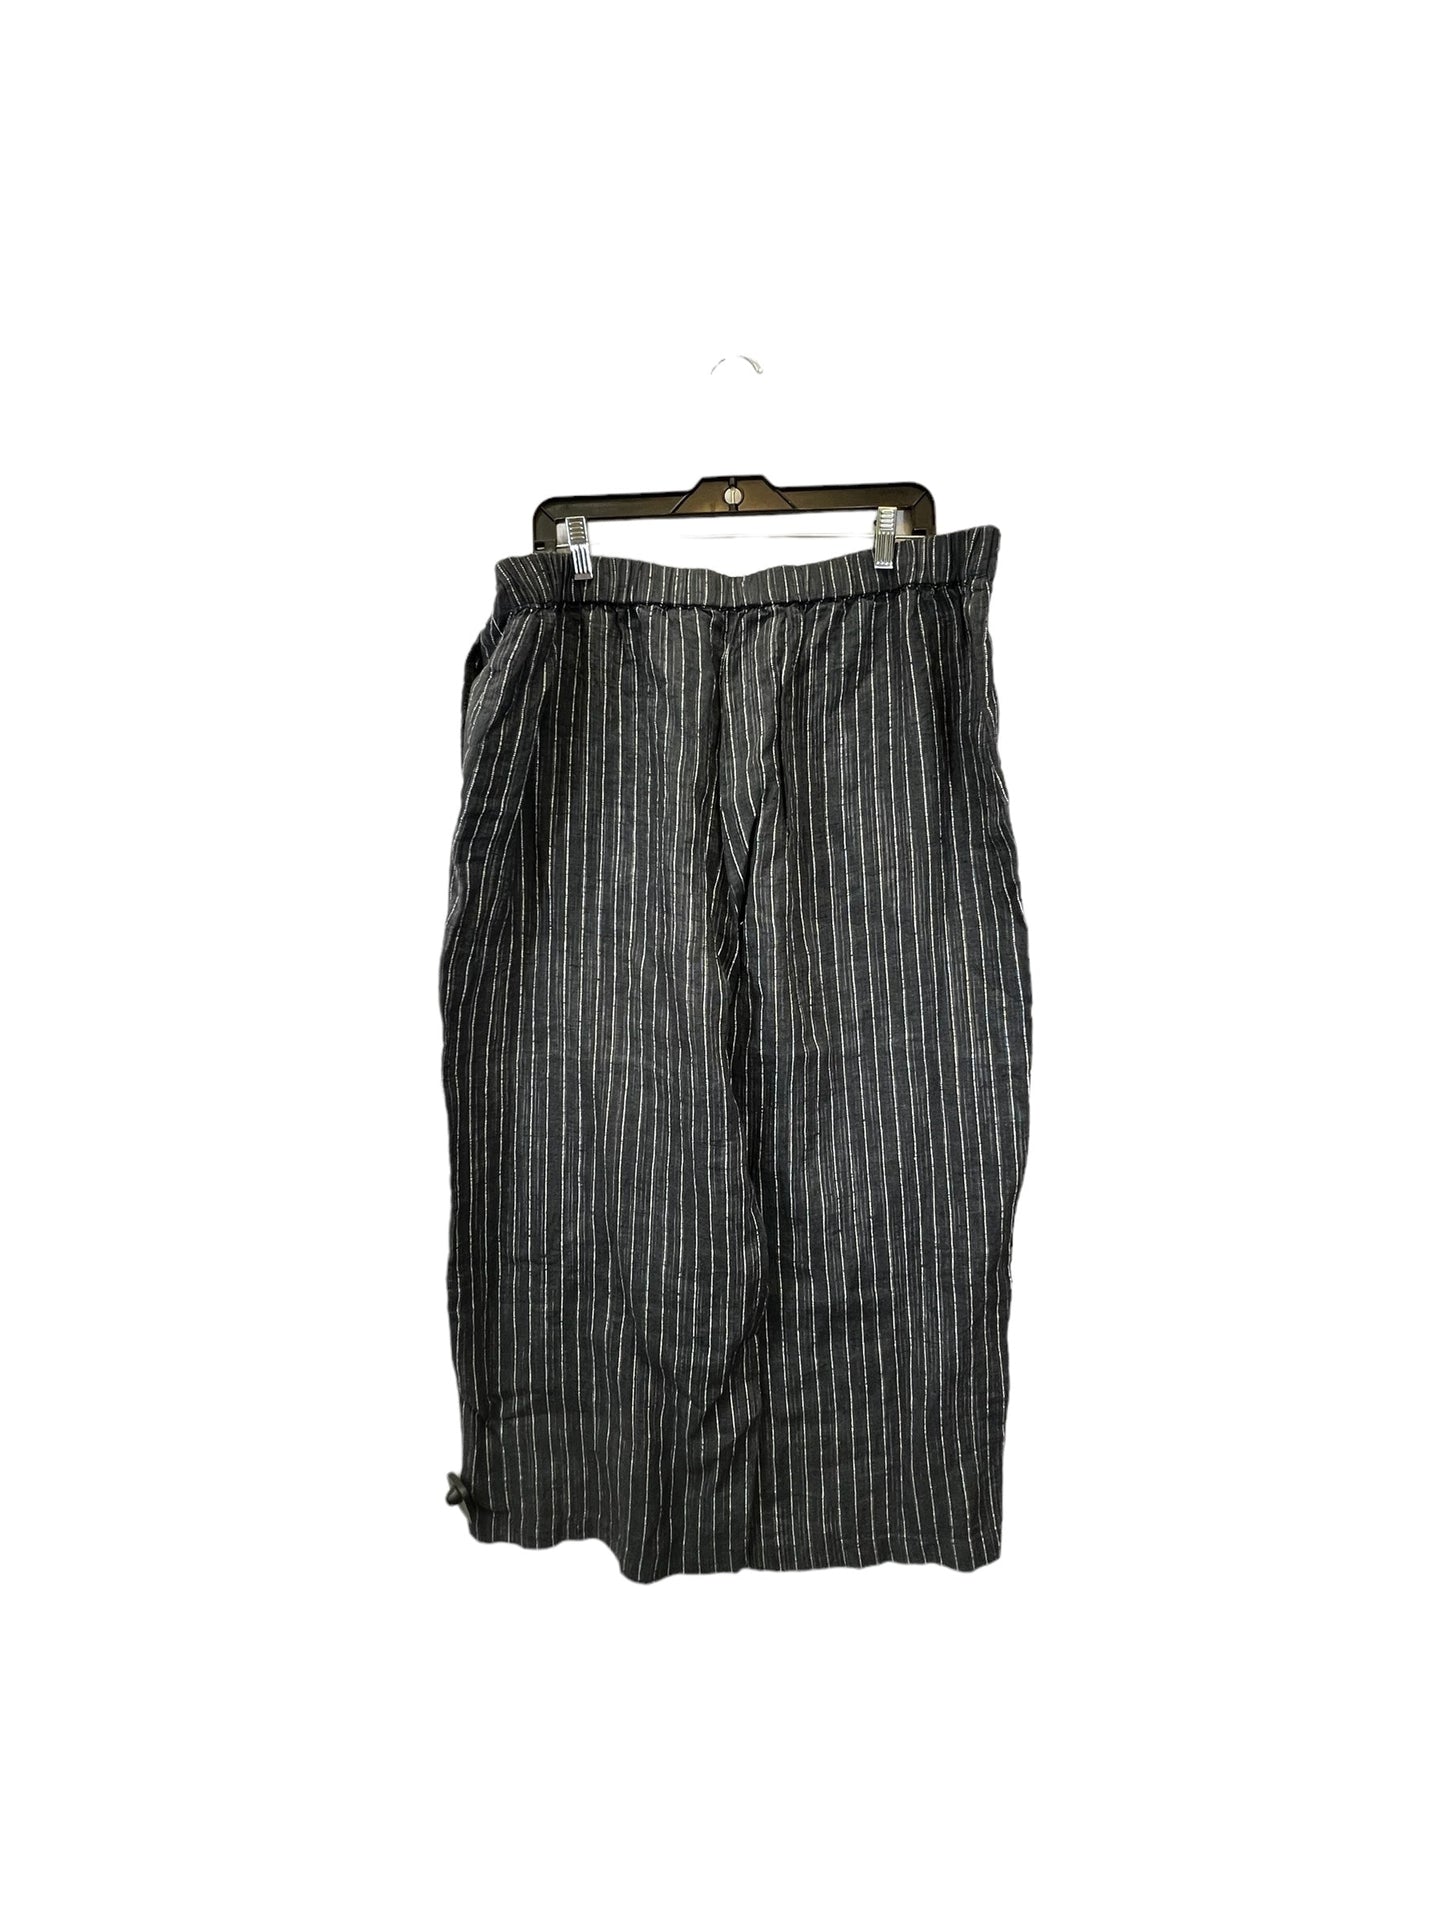 Pants Designer By Eileen Fisher  Size: Xl